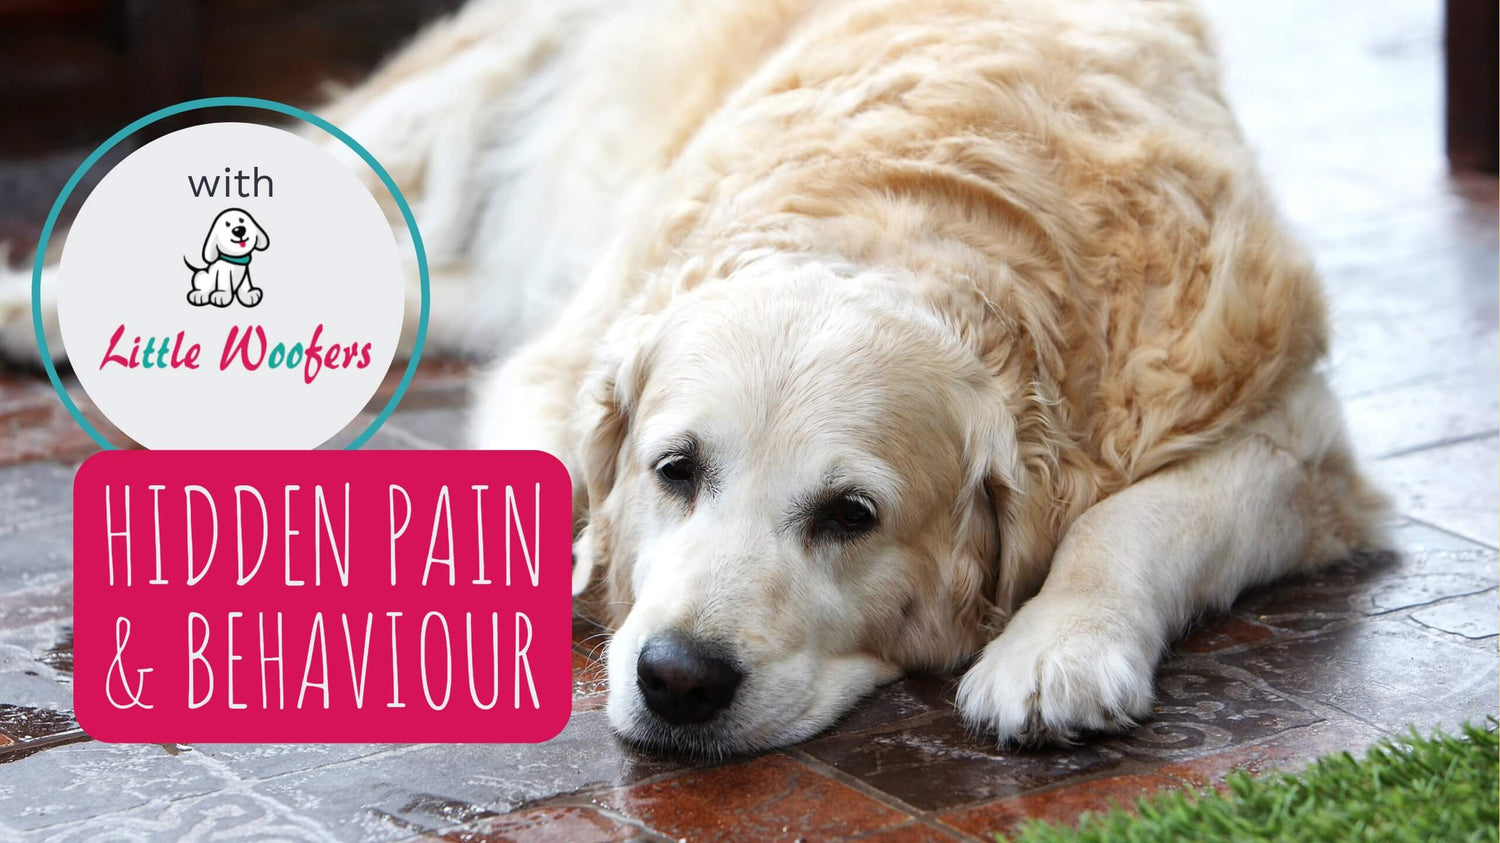 A dogs lying flat on the ground looking sad and a box with text “Hidden Pain & Behaviour”